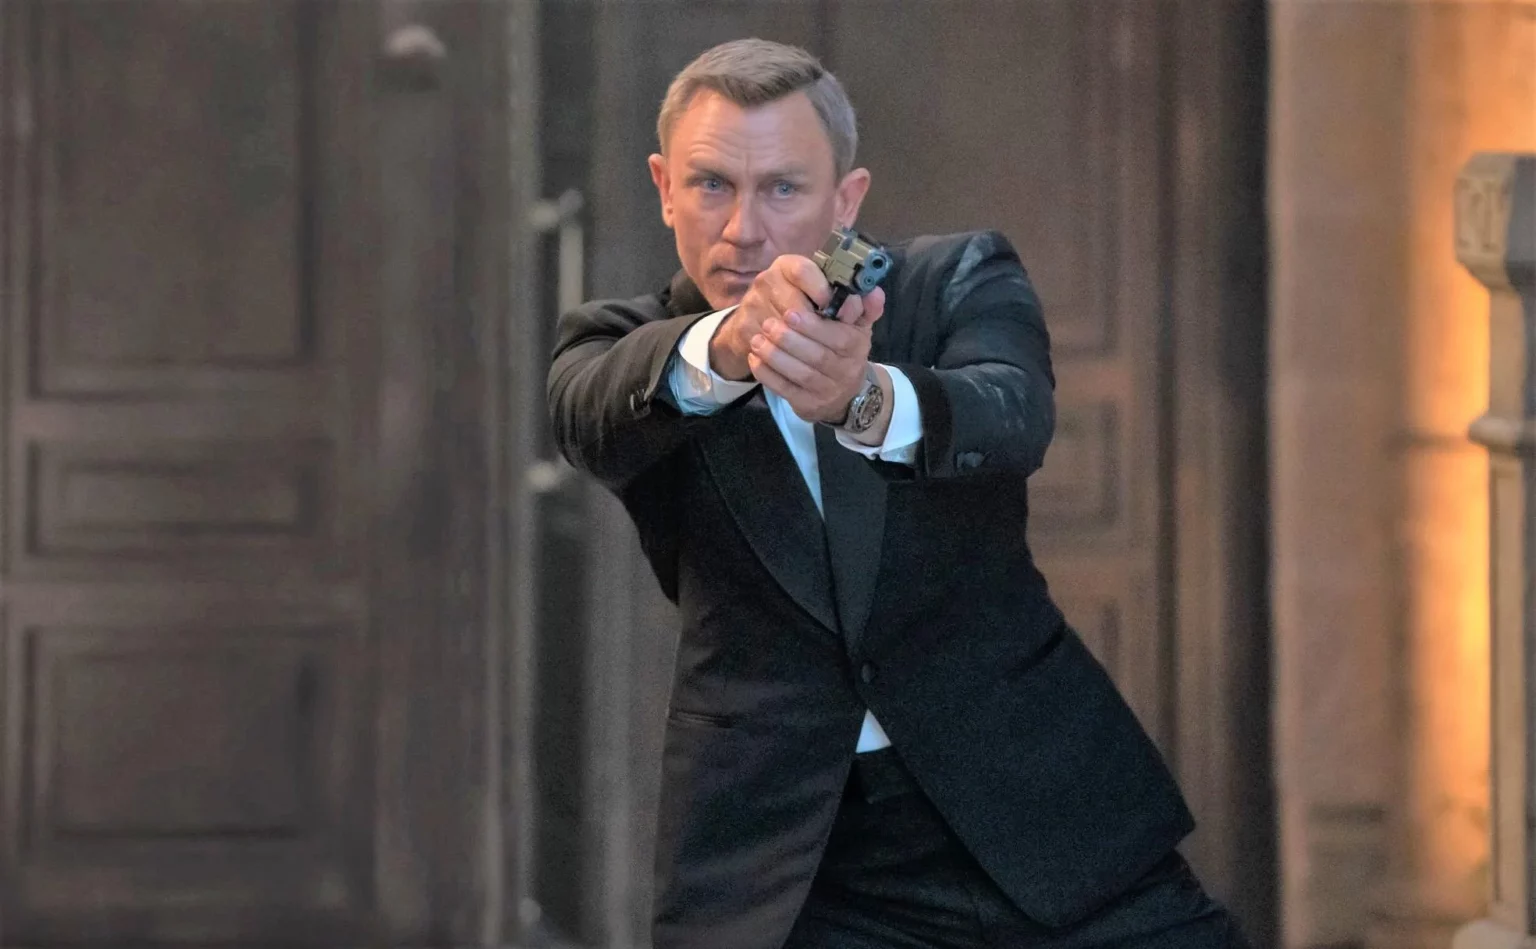 james-bond-author-charlie-higson-reveals-eons-strategy-in-choosing-the-next-007-agent